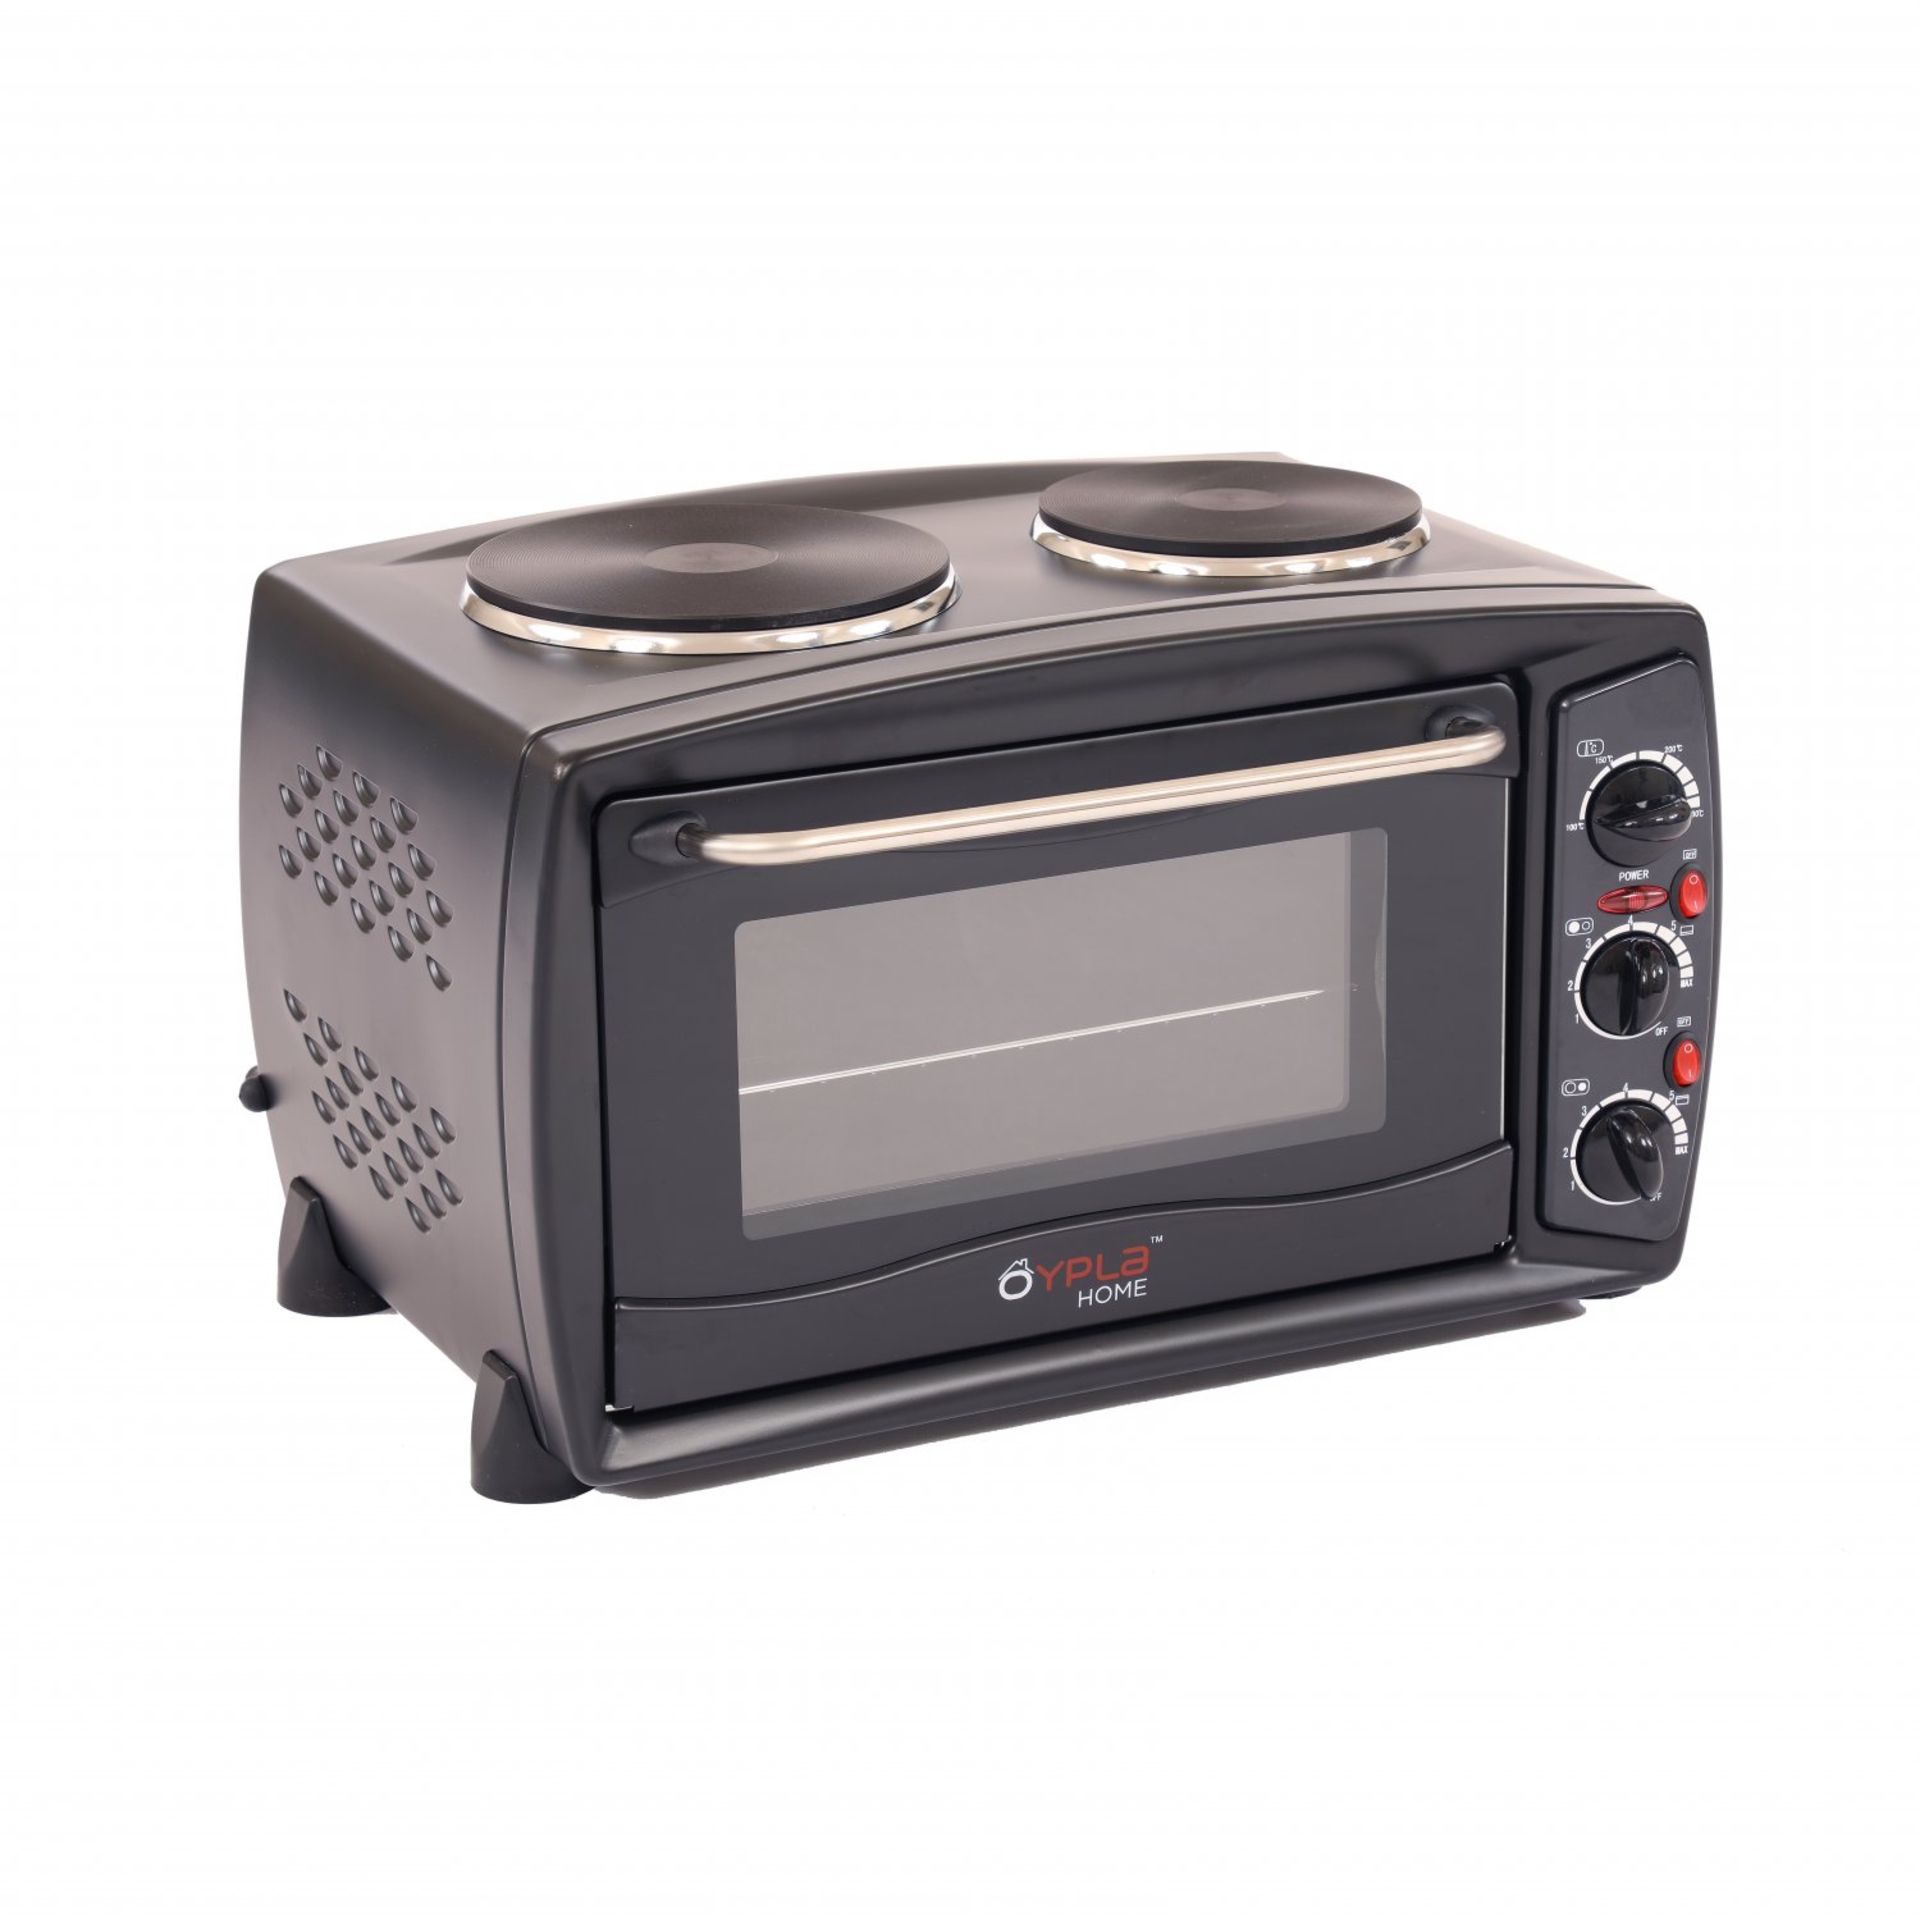 (SK9) Mini Oven c/w Hot Plates And Grill The 26 litre mini oven & grill with double hob is l...